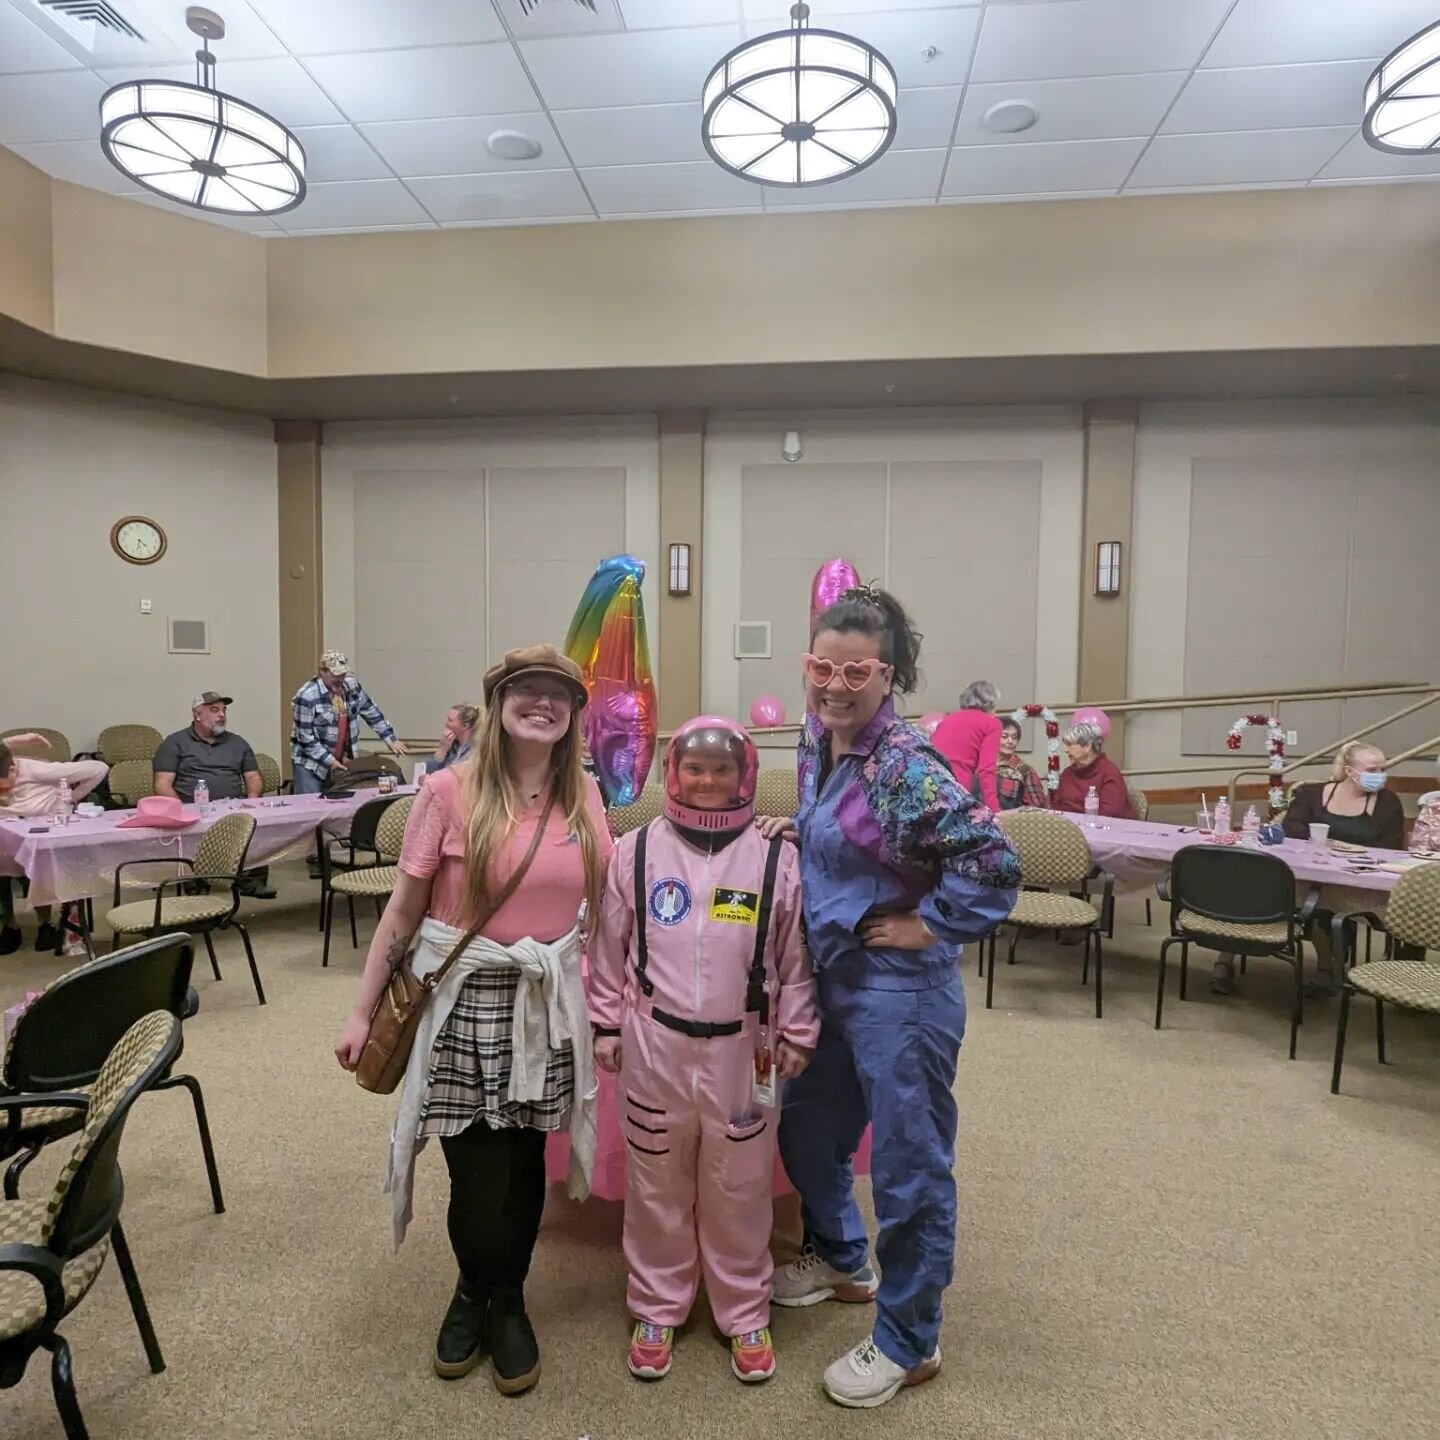 Yesterday L celebrated her 40th Birthday! She celebrated with a Barbie🩷 themed party!
Happy Birthday L!!

Central Oregon Gives Campaign is still going on!
If you'd like to donate to Diversability inc., click the link in our story!